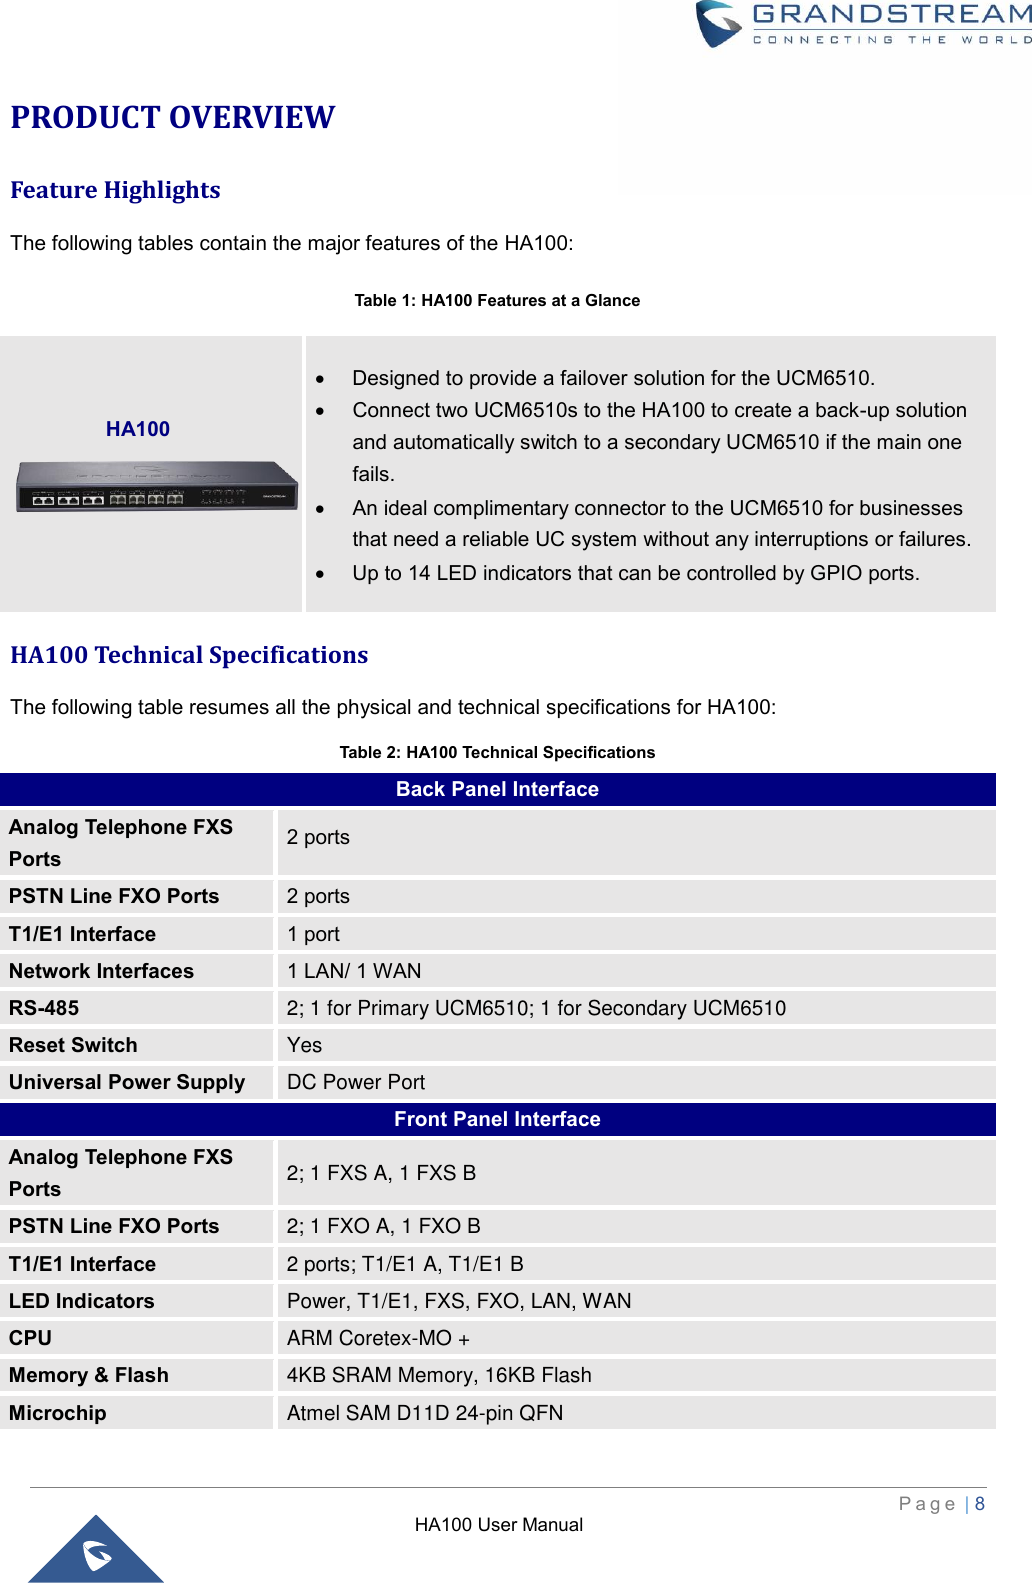 HA100 User Manual  P a g e  | 8   PRODUCT OVERVIEW Feature Highlights The following tables contain the major features of the HA100: Table 1: HA100 Features at a Glance HA100 Technical Specifications The following table resumes all the physical and technical specifications for HA100: Table 2: HA100 Technical Specifications Back Panel Interface Analog Telephone FXS Ports 2 ports PSTN Line FXO Ports 2 ports T1/E1 Interface 1 port Network Interfaces 1 LAN/ 1 WAN RS-485 2; 1 for Primary UCM6510; 1 for Secondary UCM6510 Reset Switch Yes Universal Power Supply DC Power Port Front Panel Interface Analog Telephone FXS Ports 2; 1 FXS A, 1 FXS B PSTN Line FXO Ports 2; 1 FXO A, 1 FXO B T1/E1 Interface 2 ports; T1/E1 A, T1/E1 B LED Indicators Power, T1/E1, FXS, FXO, LAN, WAN CPU ARM Coretex-MO + Memory &amp; Flash 4KB SRAM Memory, 16KB Flash Microchip Atmel SAM D11D 24-pin QFN    • Designed to provide a failover solution for the UCM6510. • Connect two UCM6510s to the HA100 to create a back-up solution and automatically switch to a secondary UCM6510 if the main one fails. • An ideal complimentary connector to the UCM6510 for businesses that need a reliable UC system without any interruptions or failures. • Up to 14 LED indicators that can be controlled by GPIO ports. HA100 